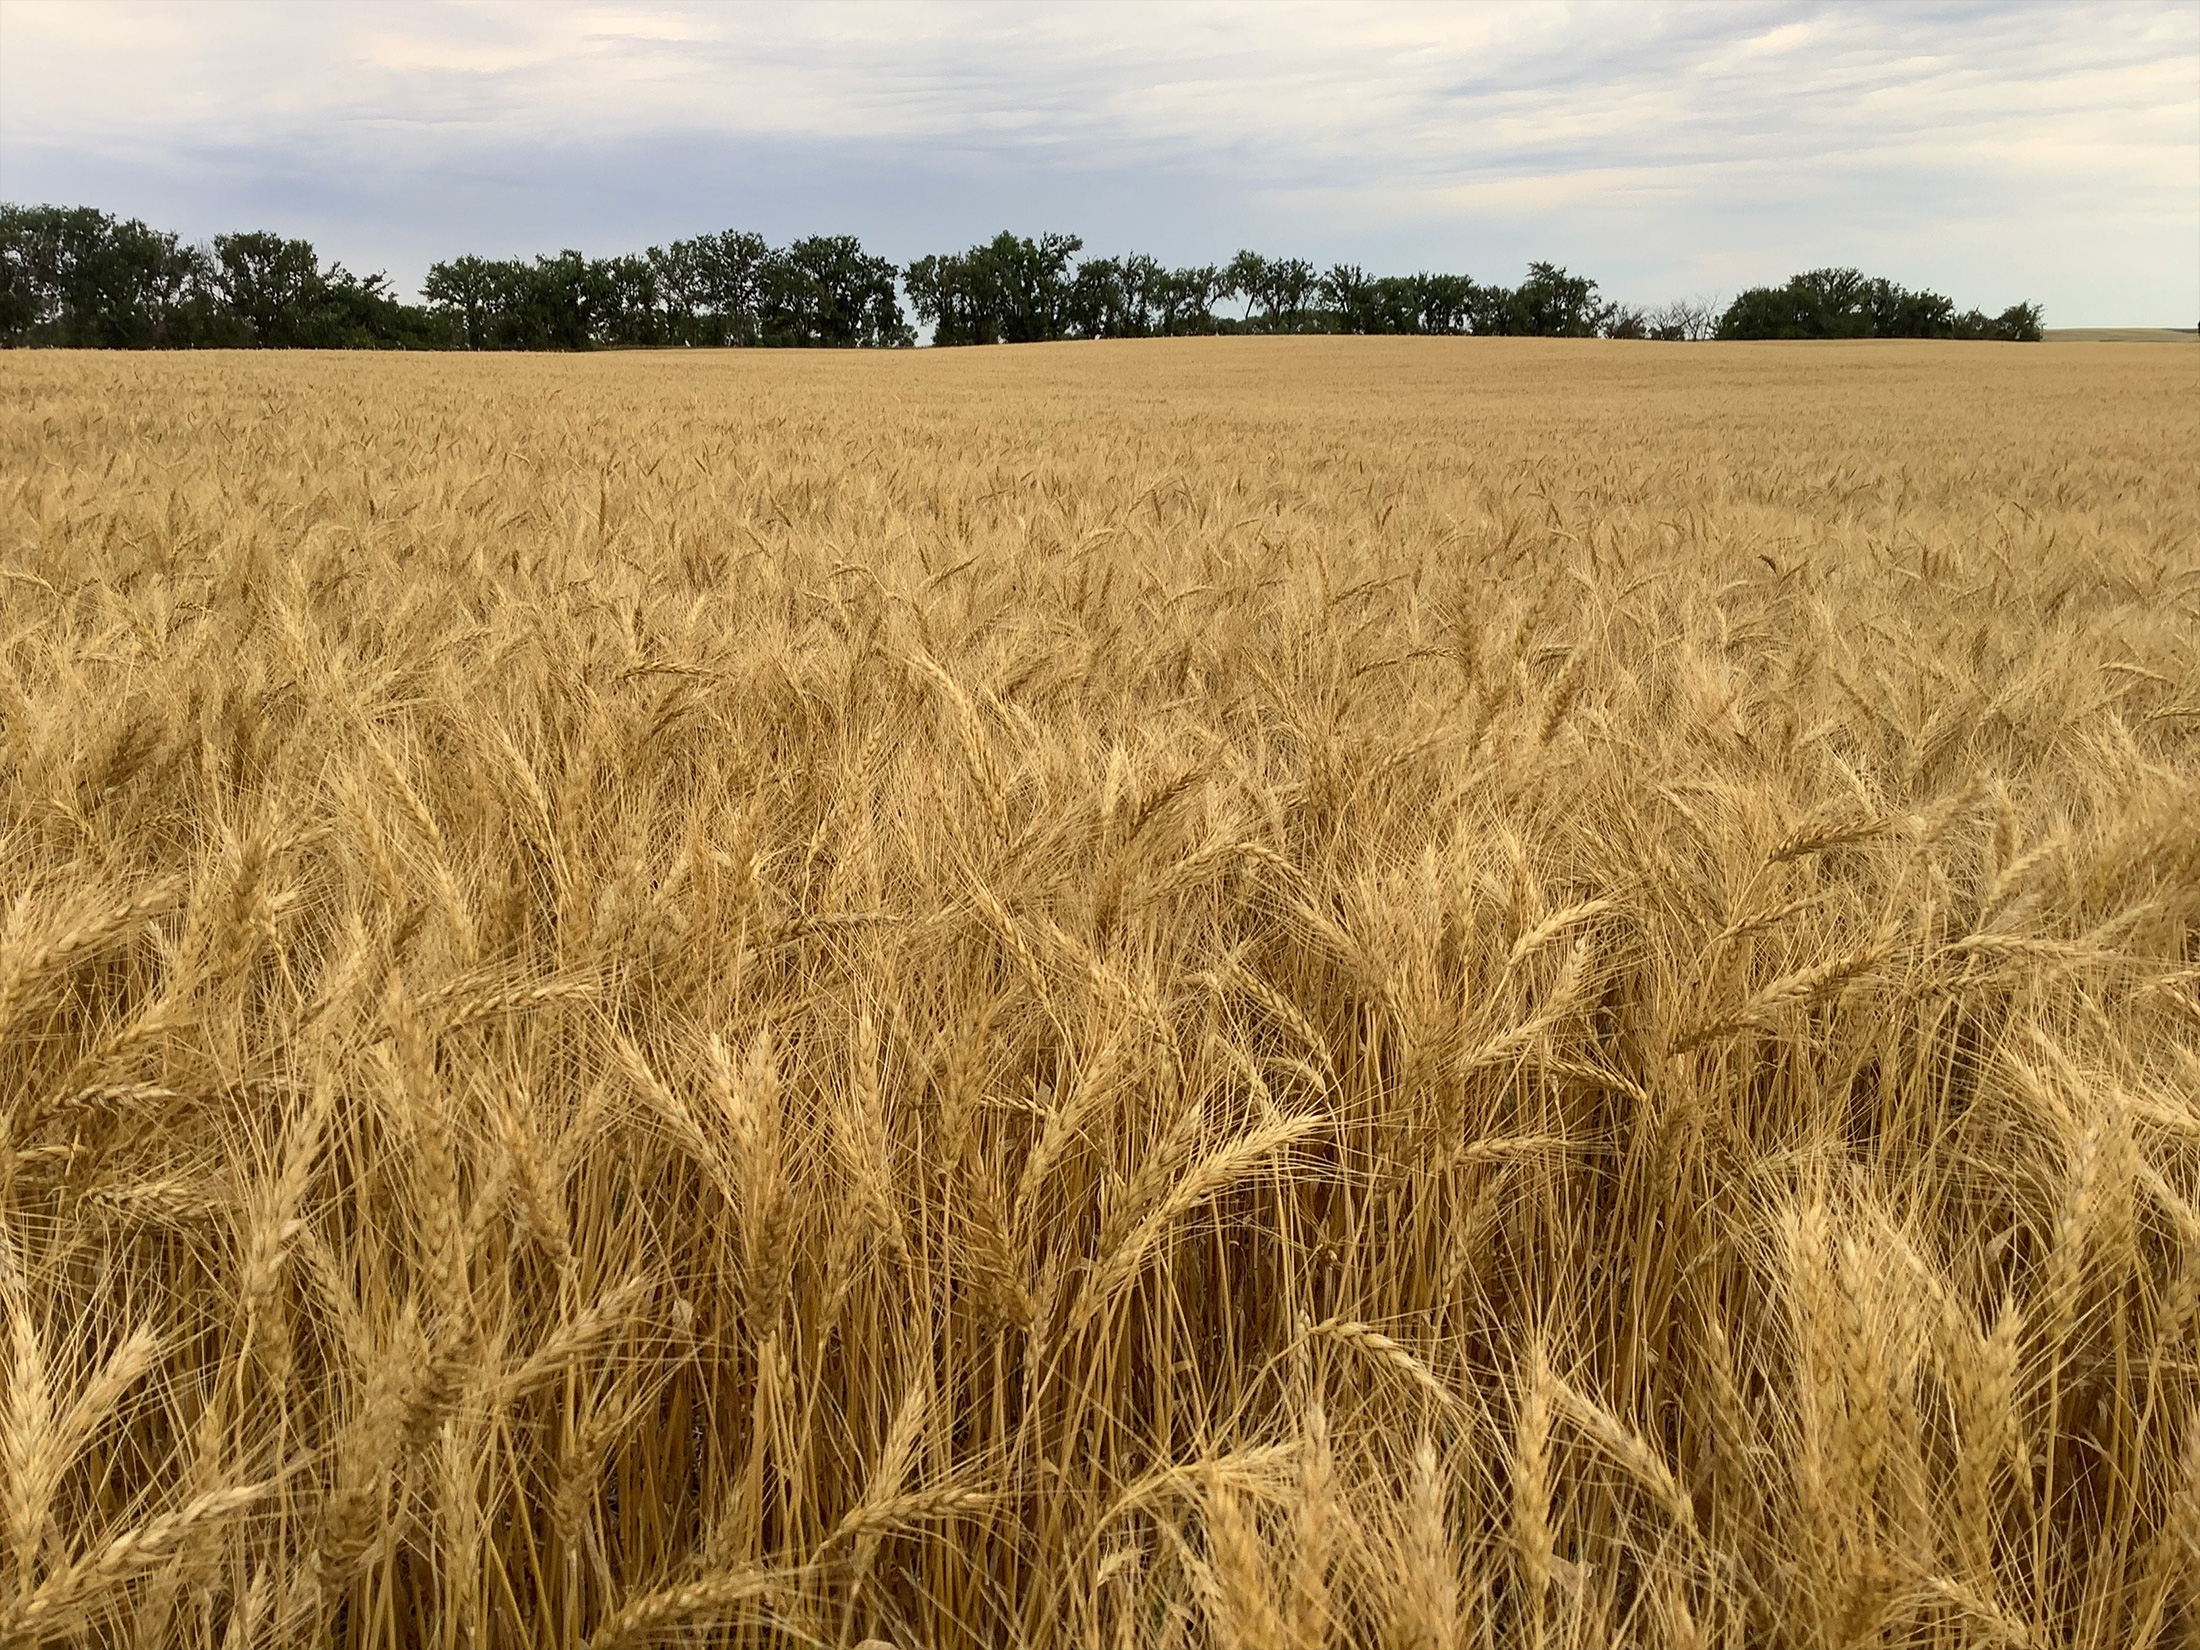 A field with wheat